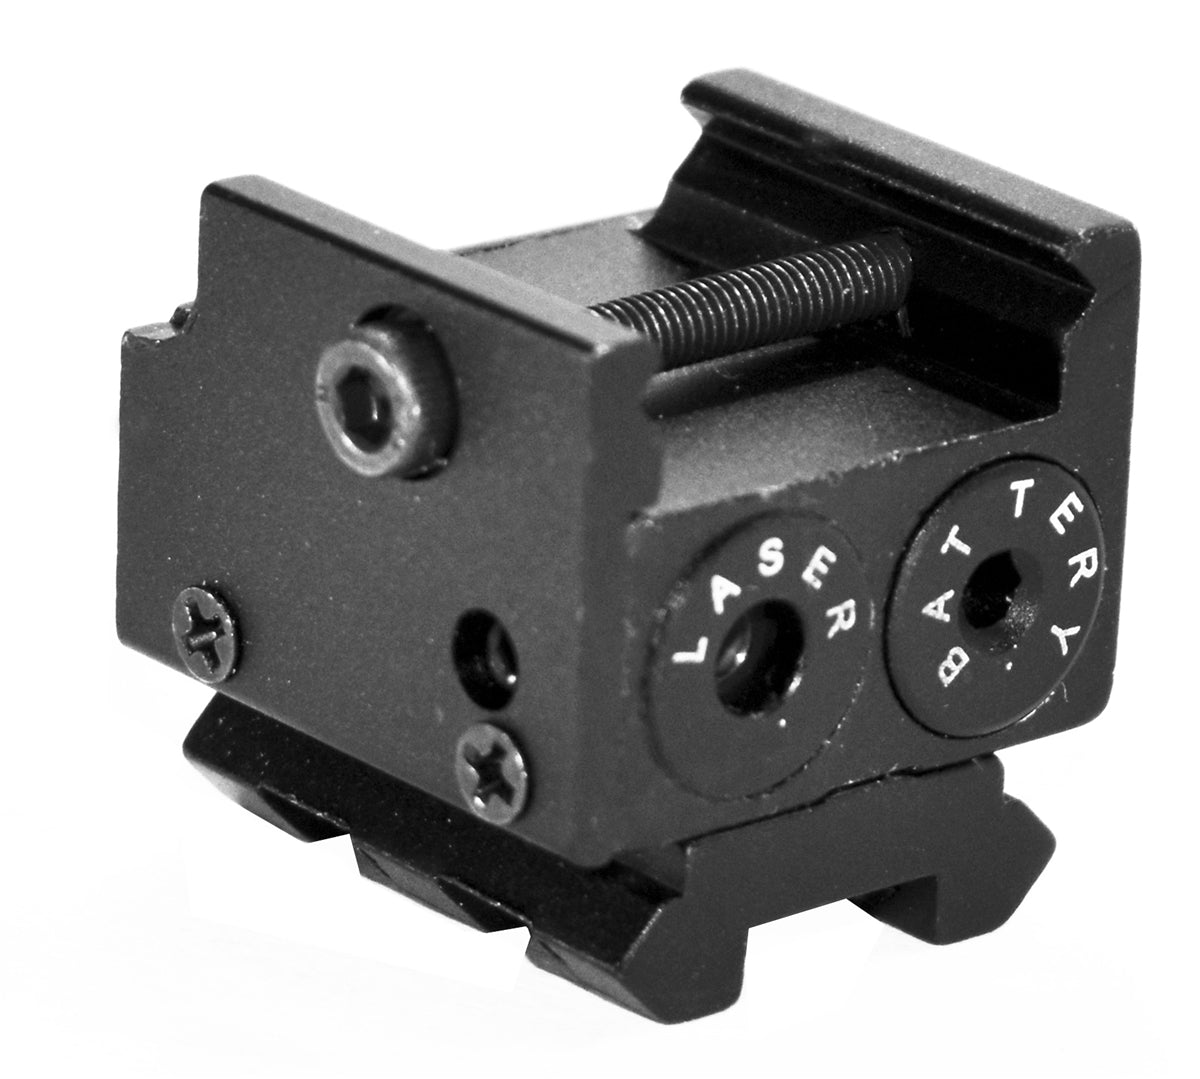 Trinity Compact Red Pistol Laser Sight For M&P® 380 Shield Smith and Wesson sd9 Handguns.